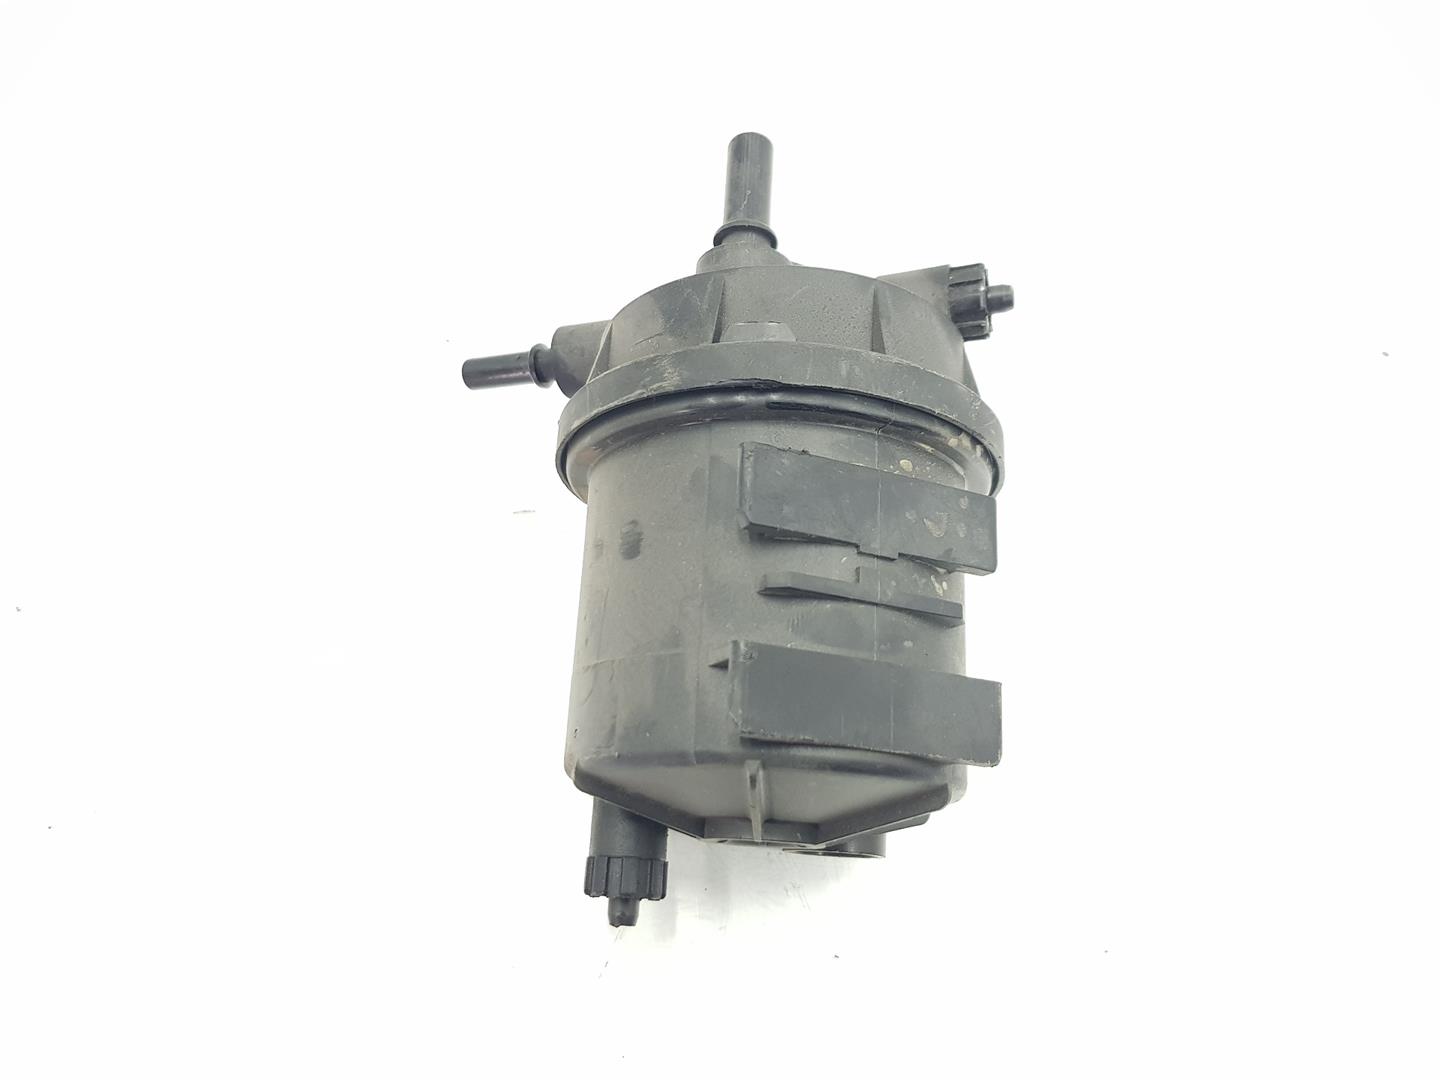 RENAULT Kangoo 1 generation (1998-2009) Other Engine Compartment Parts 7700116169, 6610964161 19808580